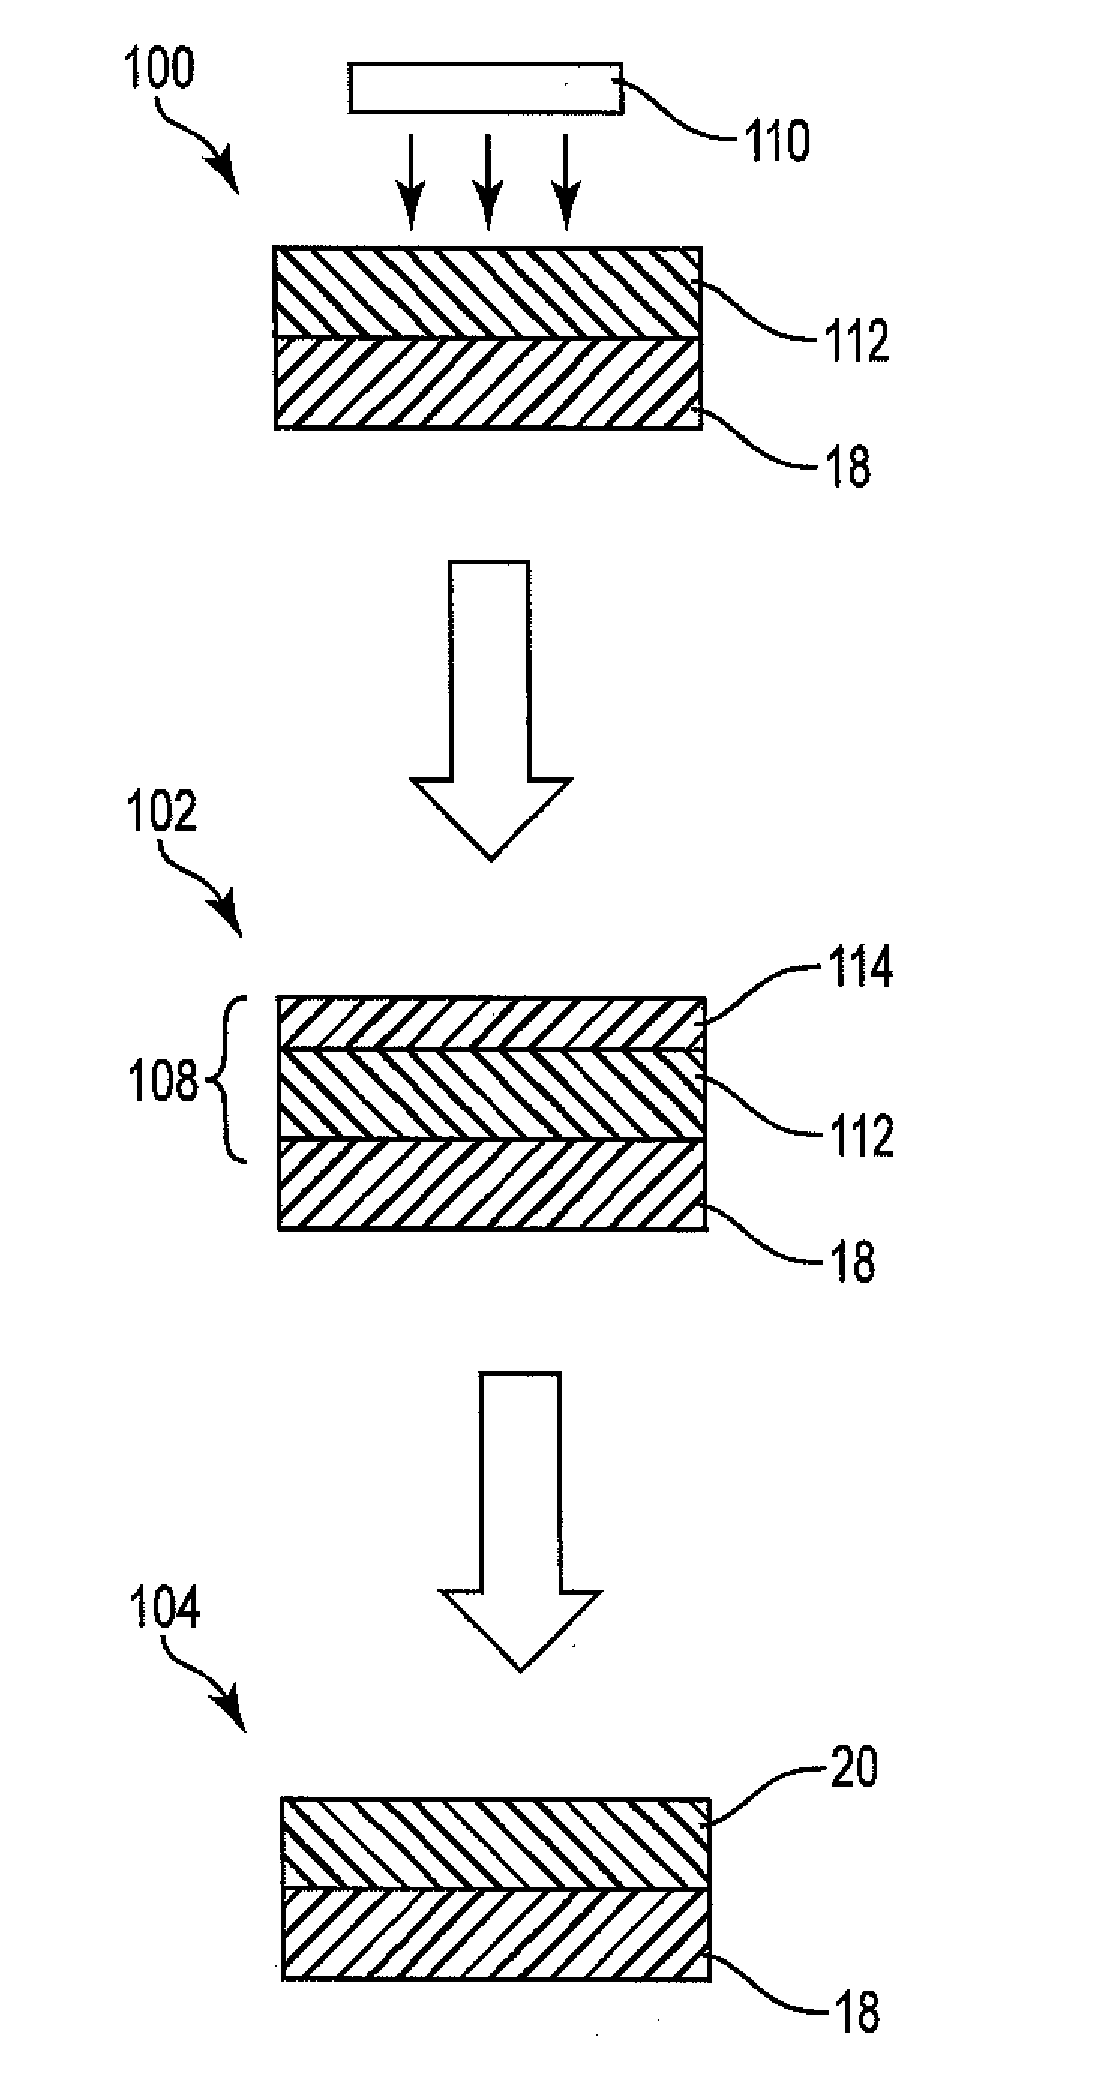 Chalcogenide-based materials and methods of making such materials under vacuum using post-chalcogenization techniques